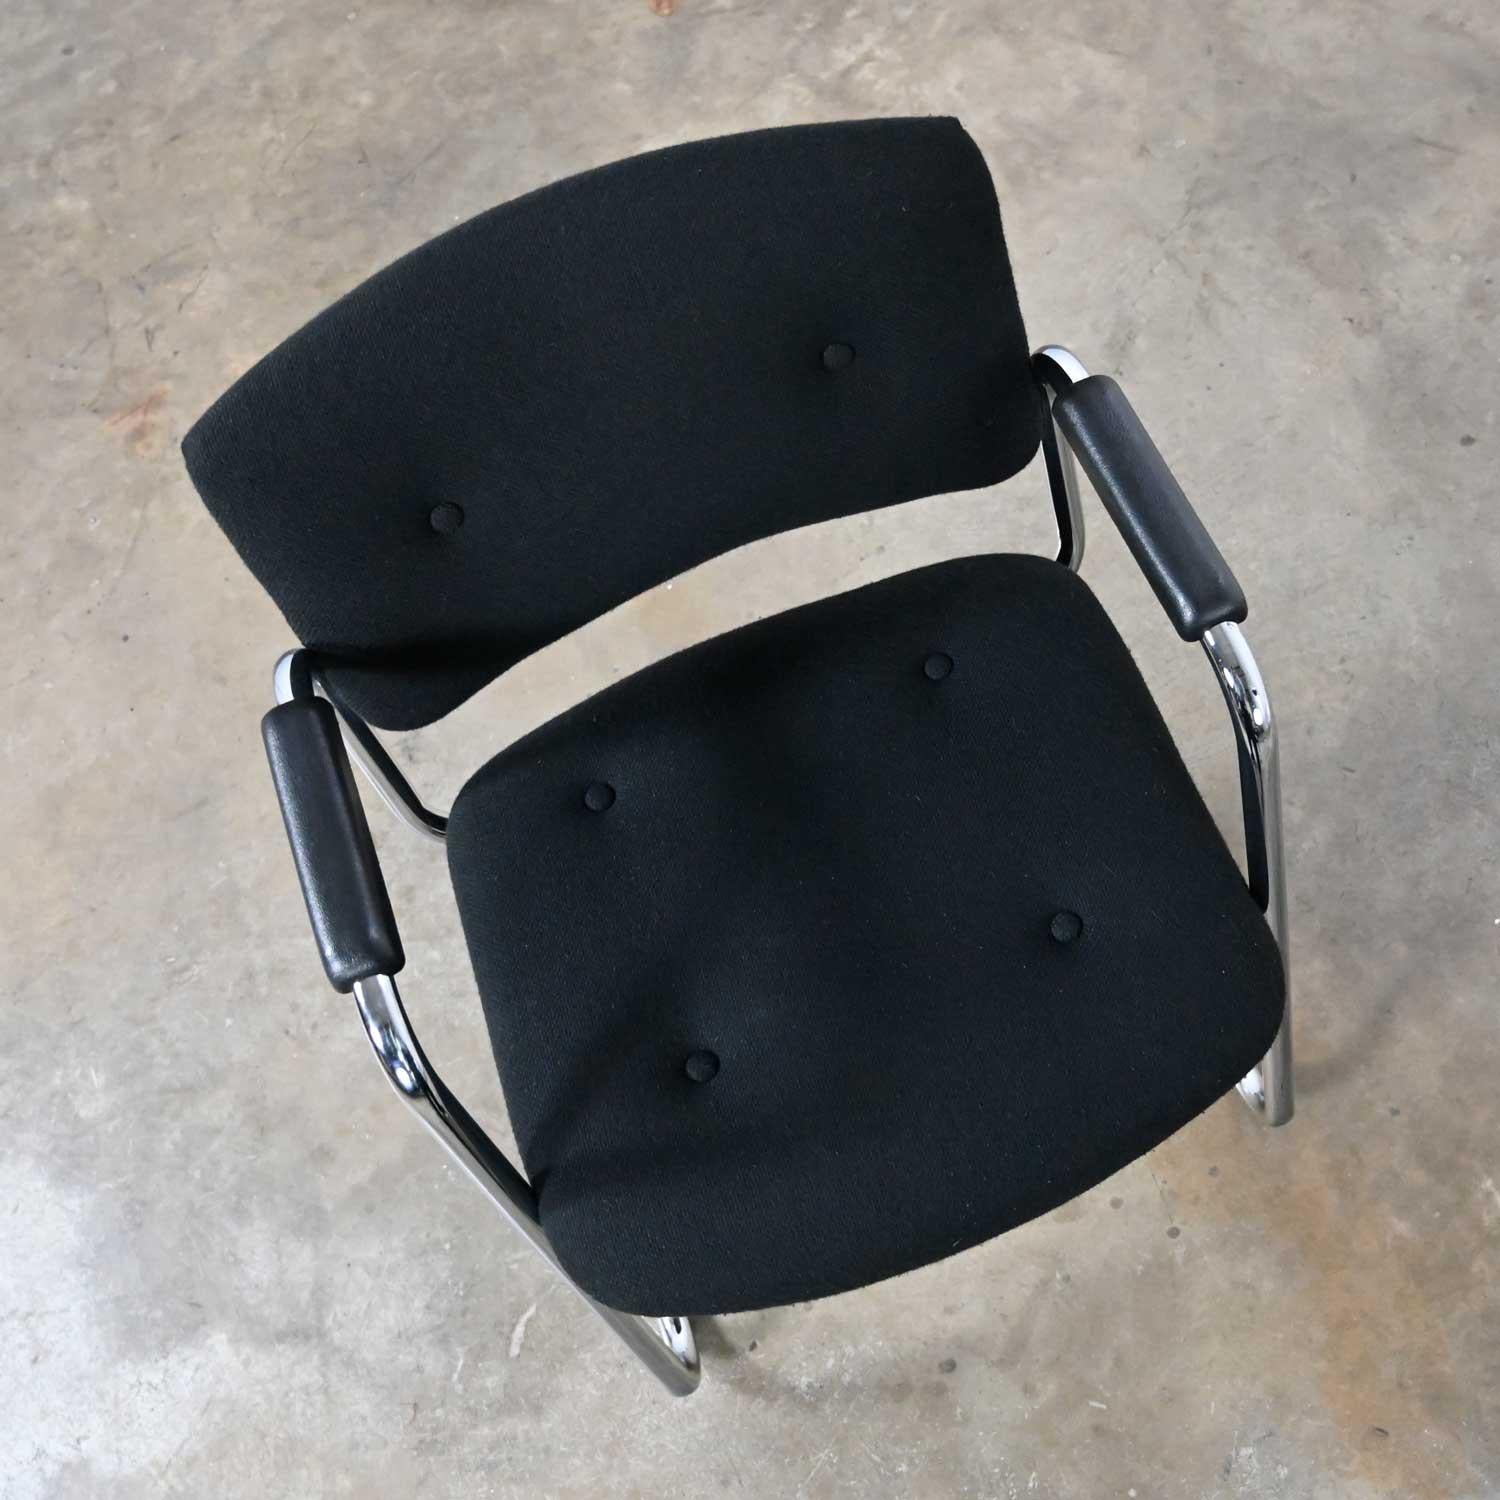 American Vintage Modern Black & Chrome Cantilever Chair by United Chair Co Style of Steel For Sale